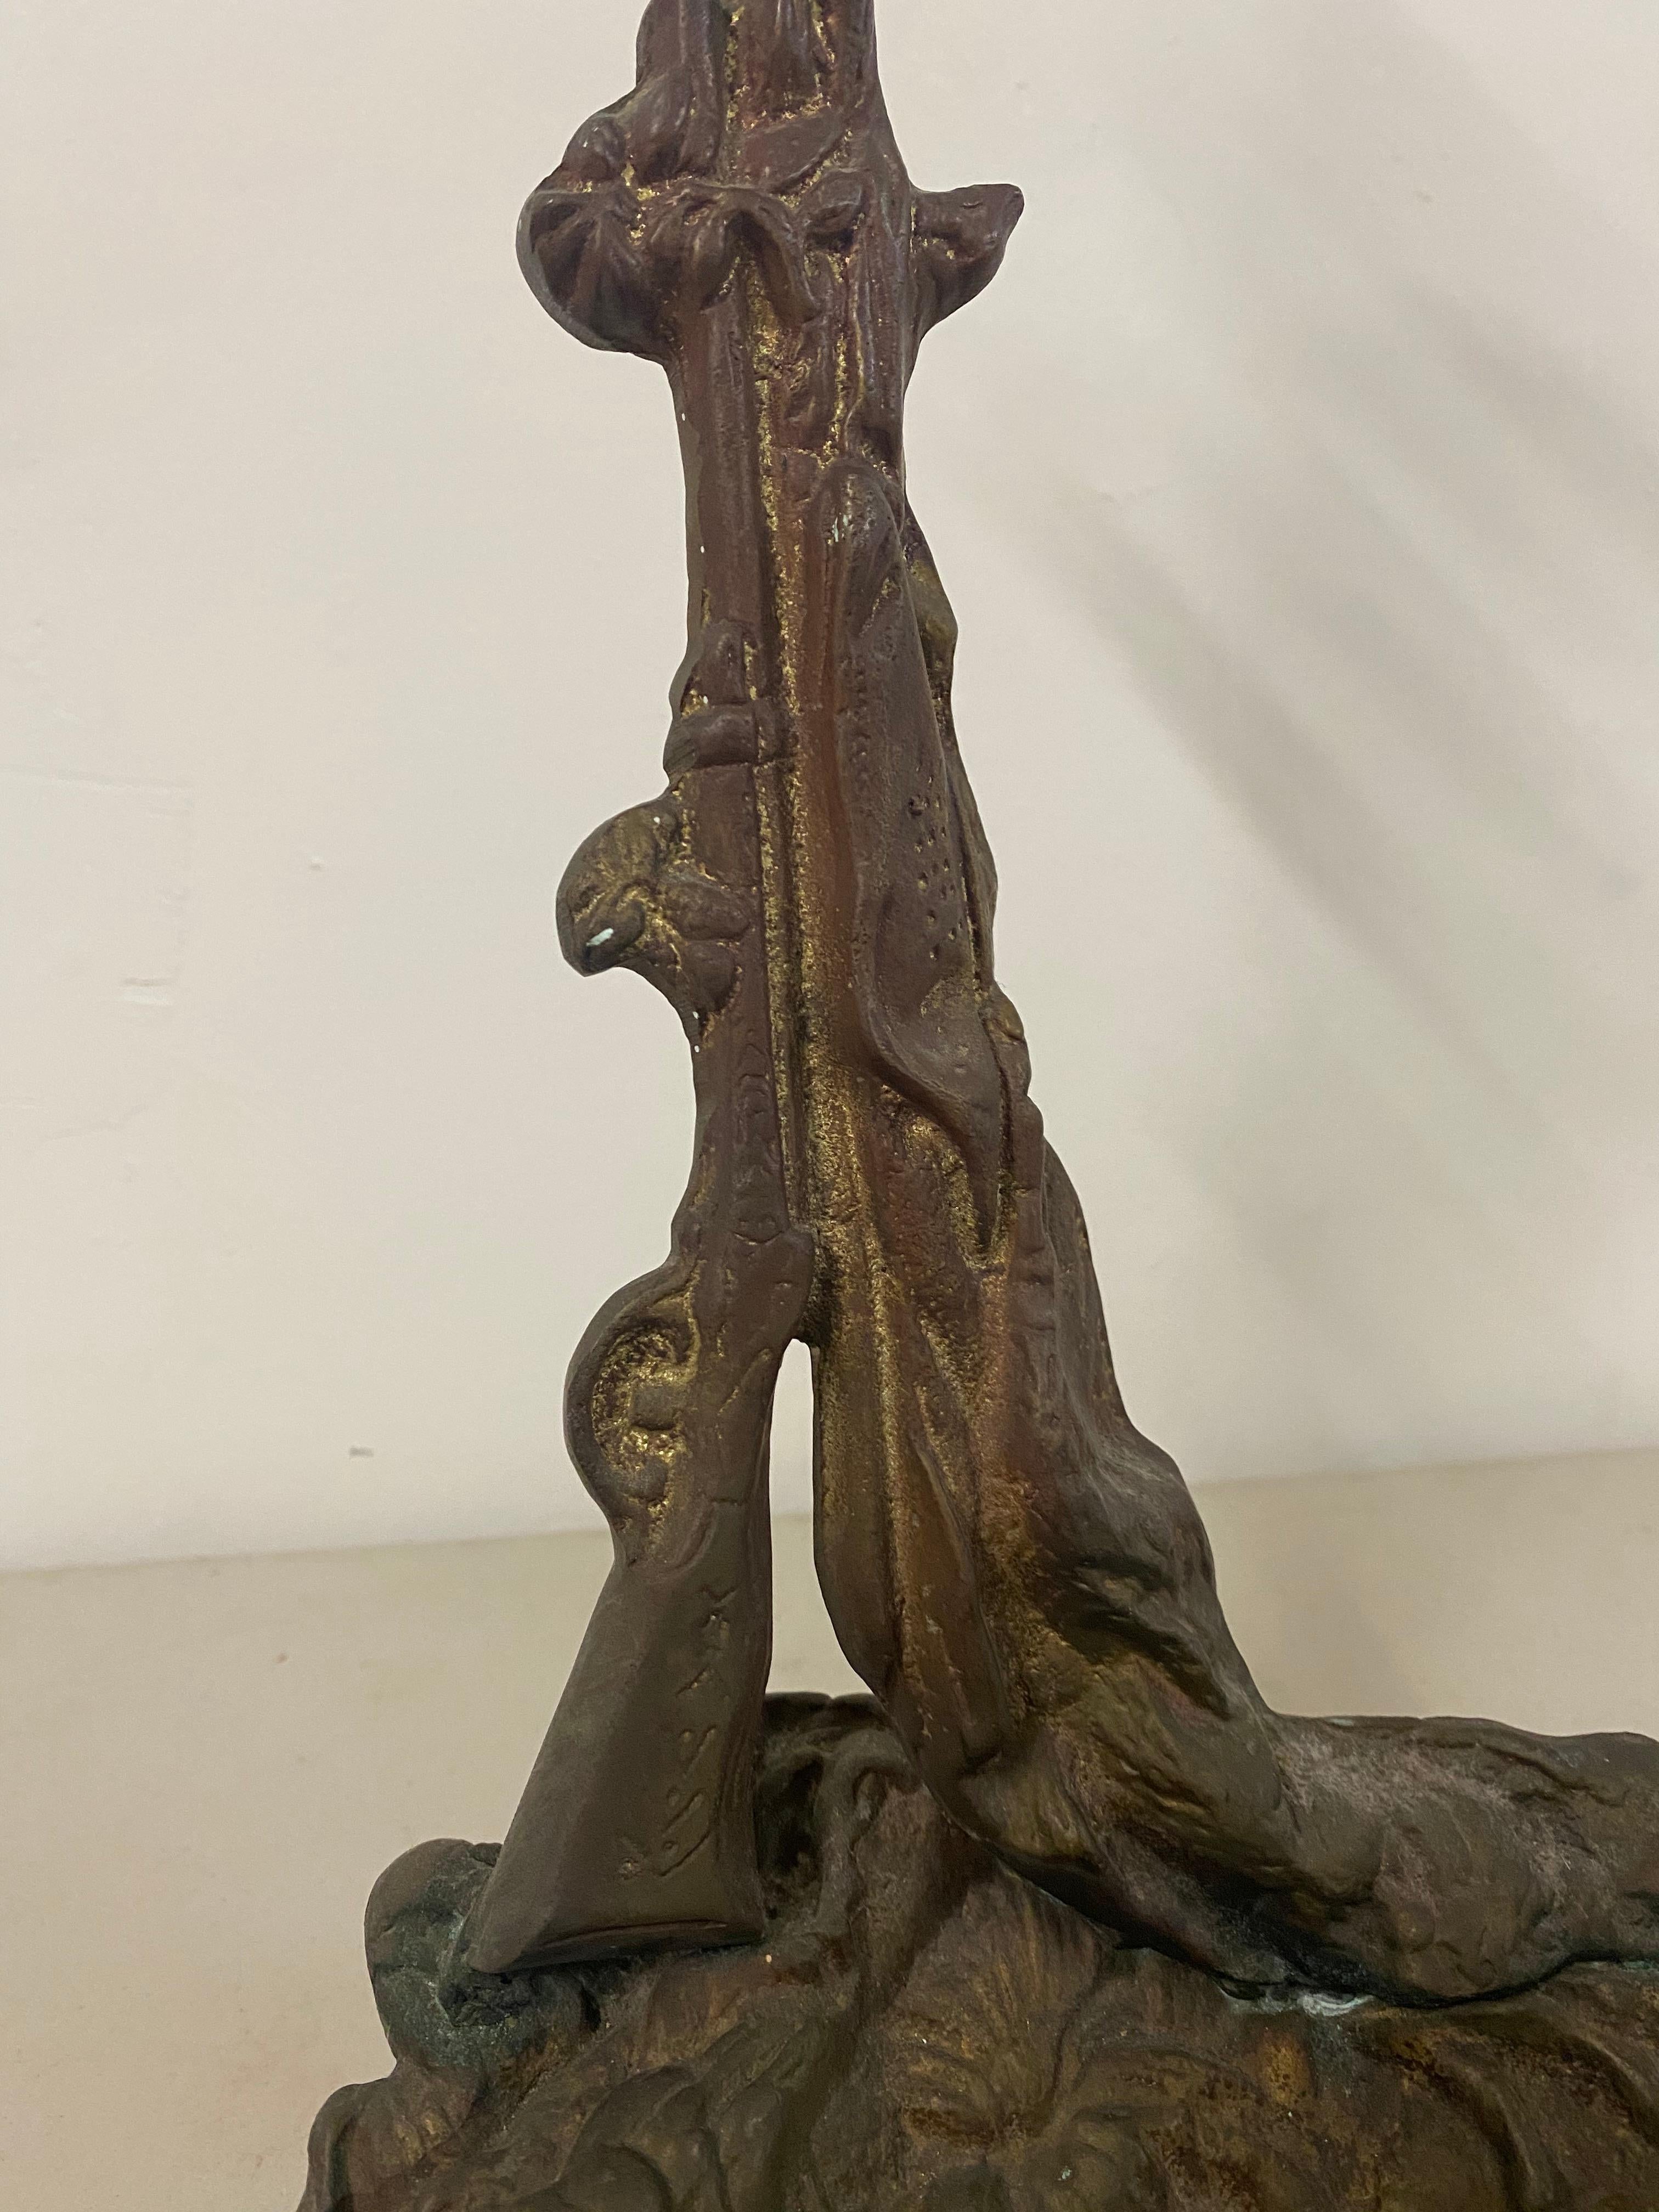 Early 20th century cast iron fireplace tool stand or umbrella stand, circa 1920

Cast iron tool or umbrella holder

A rustic stand with a dog reclining at the front edge and a rifle leaning up against the stand

Dimensions 10